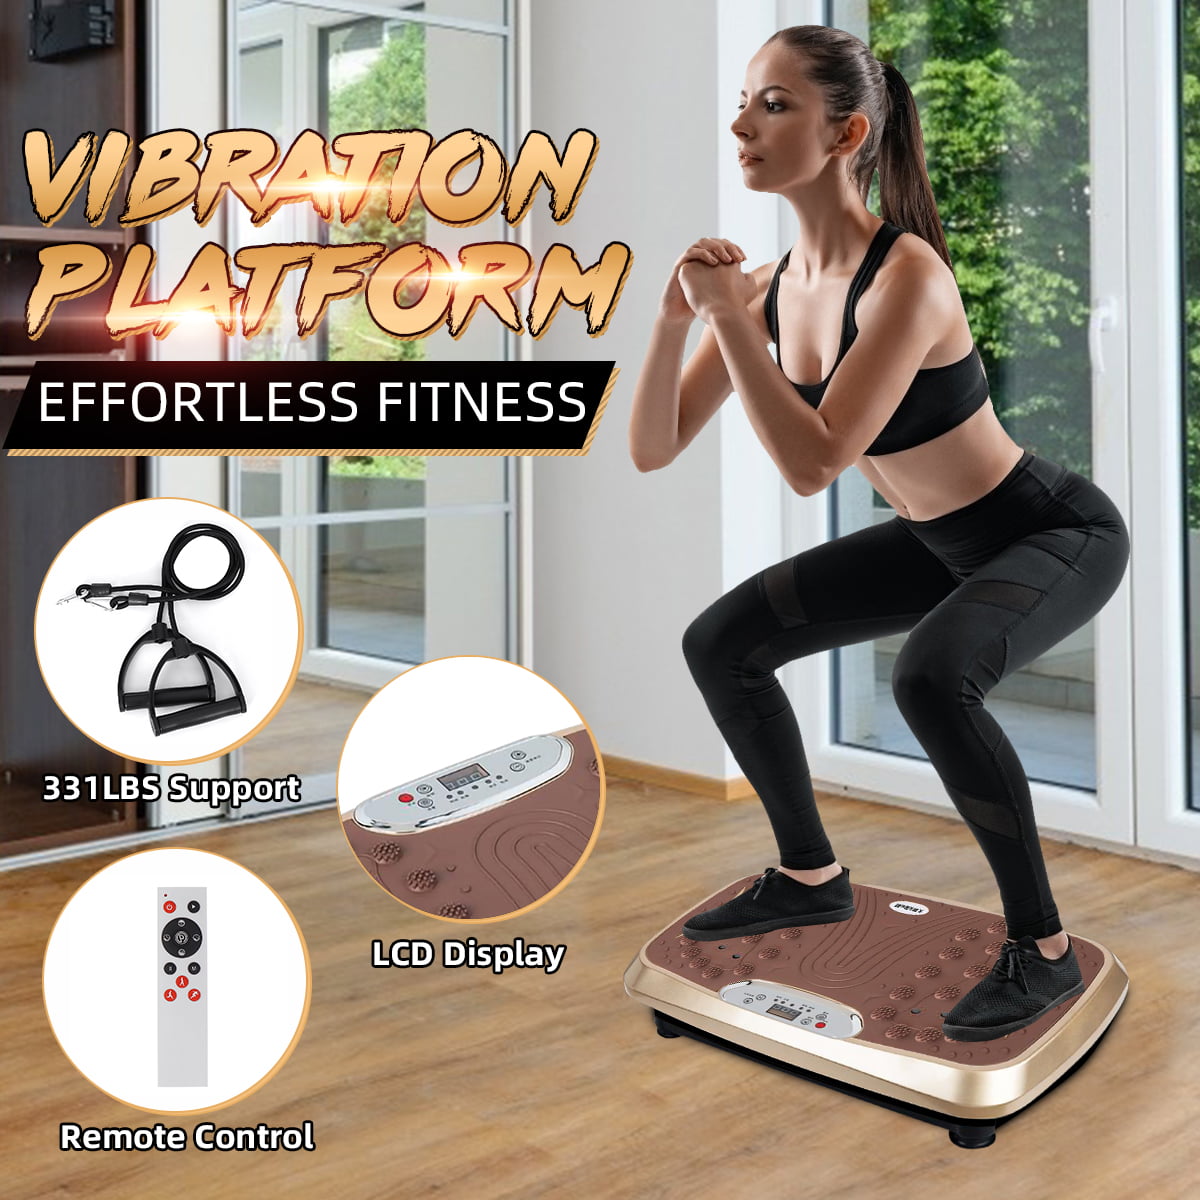 Details about   PowerFit Elite Vibration Platform with Exercise Bands and Remote Model F14235 